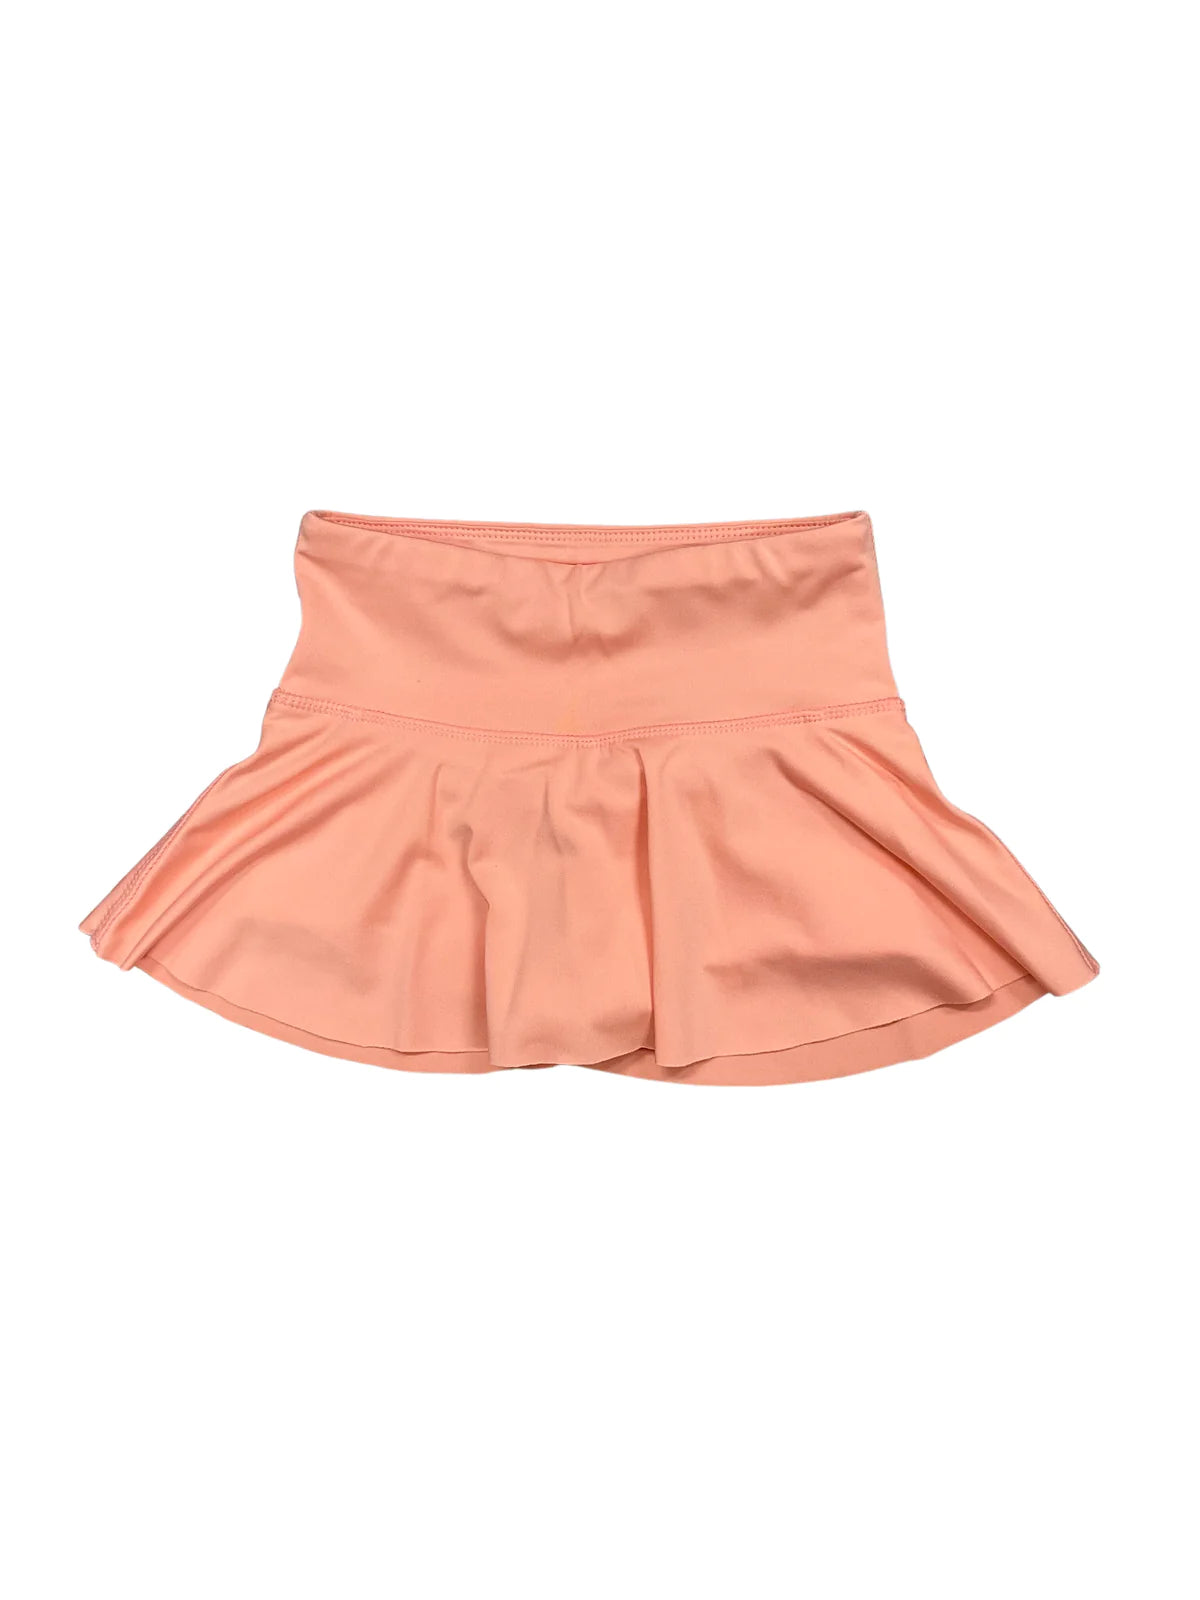 Athleisure Skirt (available in apricot and red)